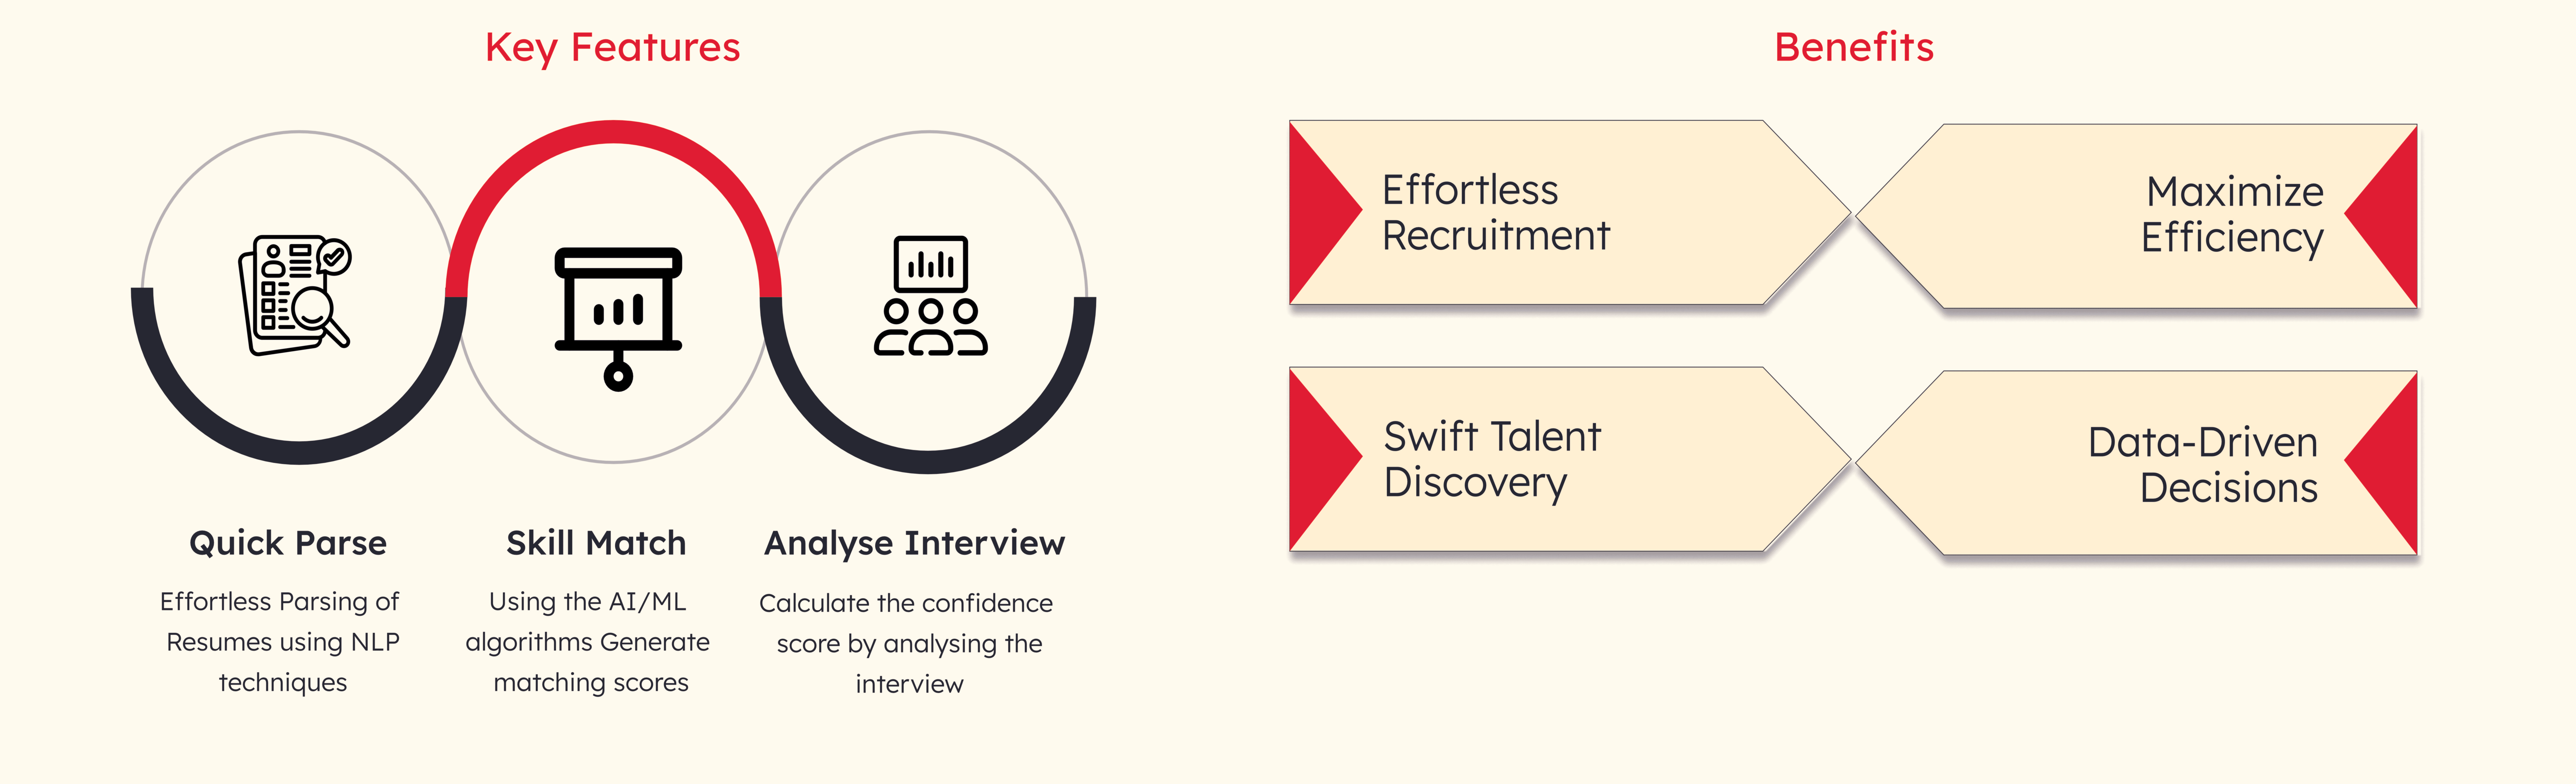 Features and benefits of XpressRecruit- an AI based candidate selection solution